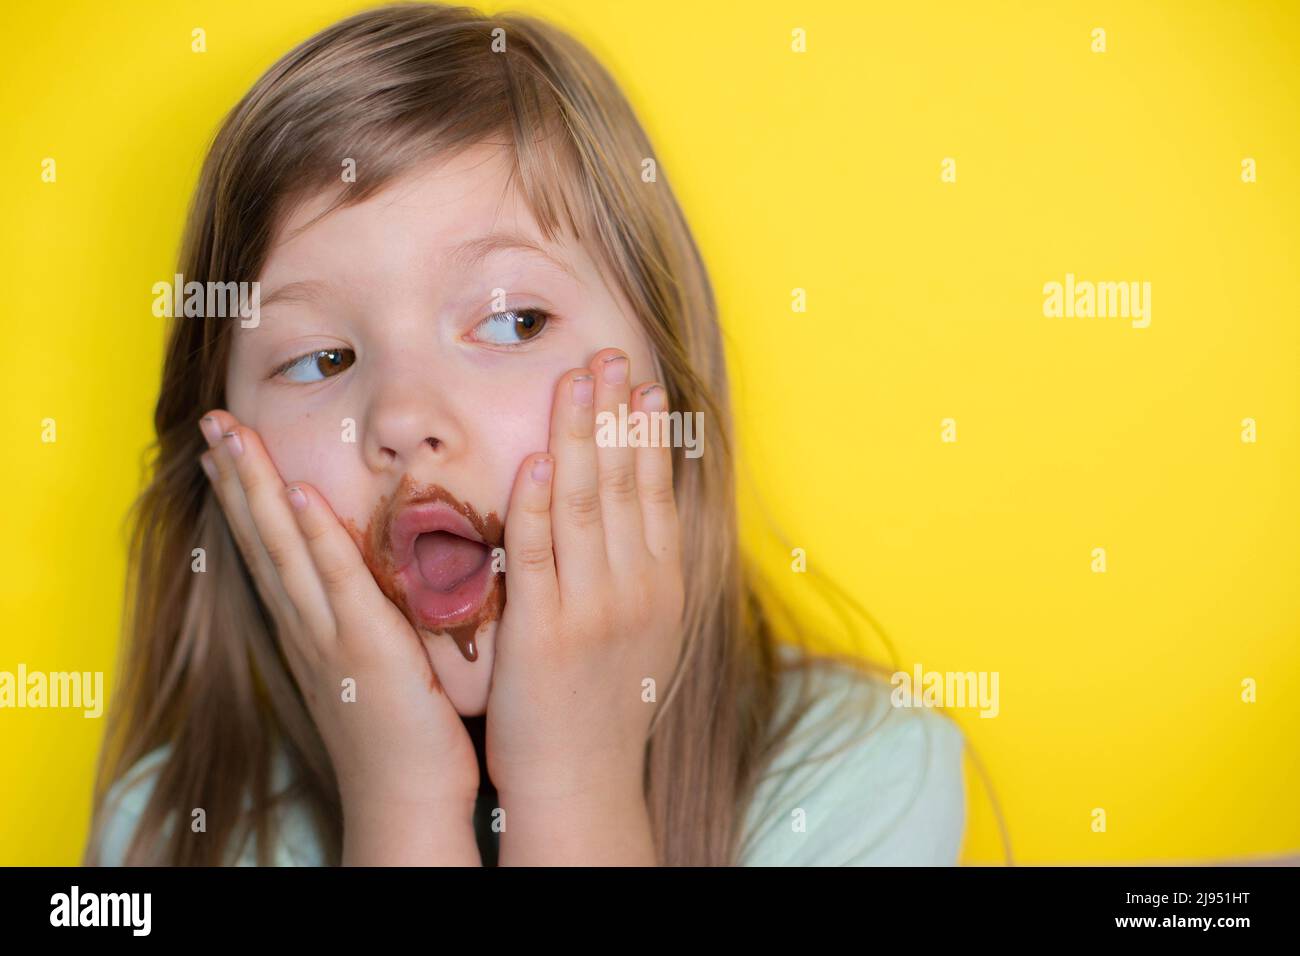 Frightened little girl eating chocolate dirty face Stock Photo